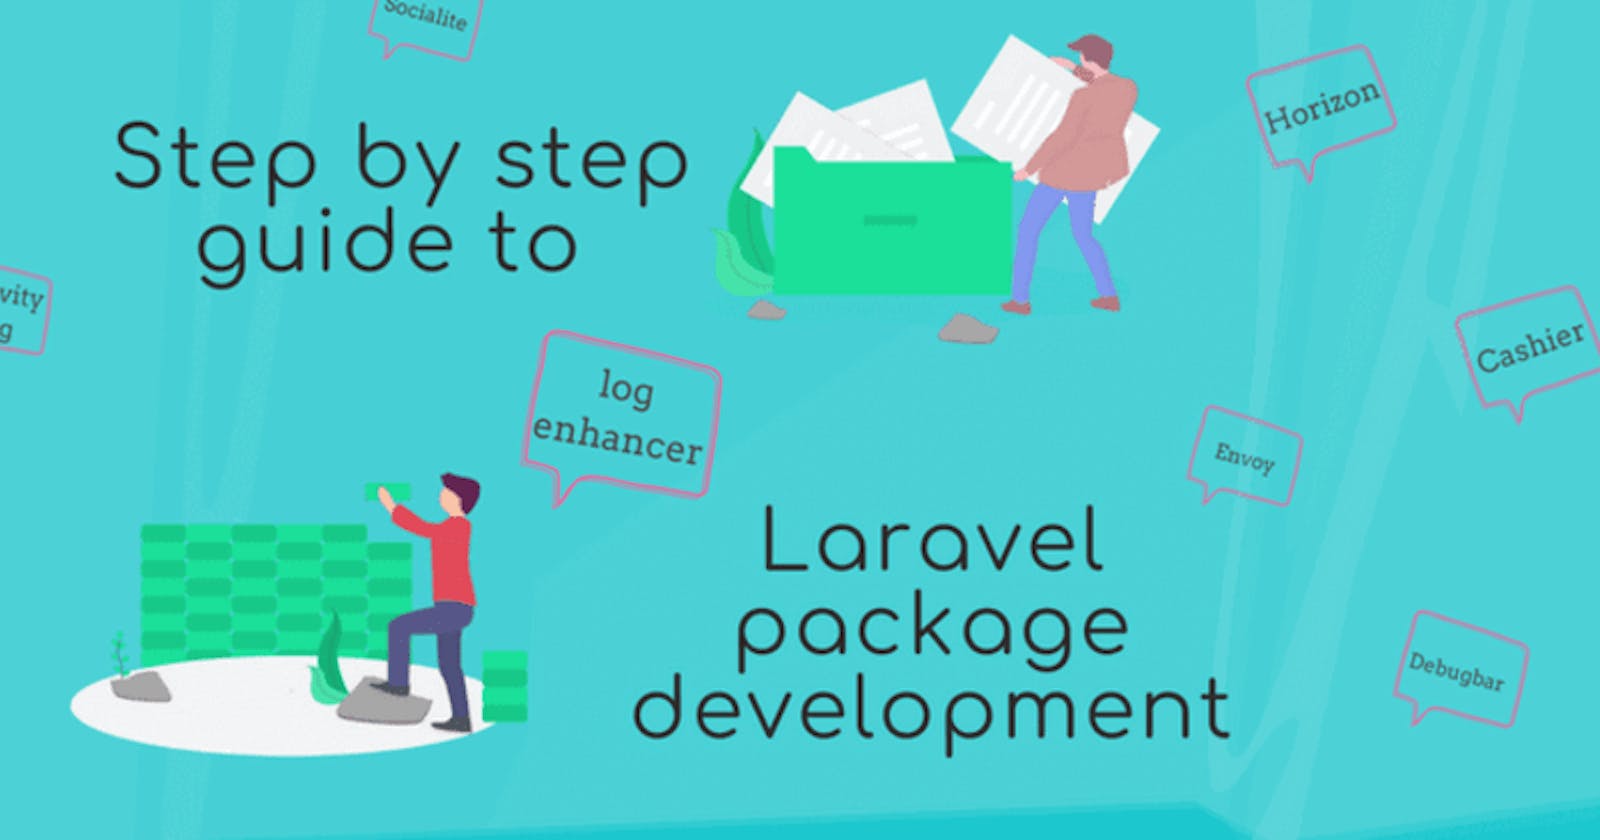 Step by step guide to Laravel package development